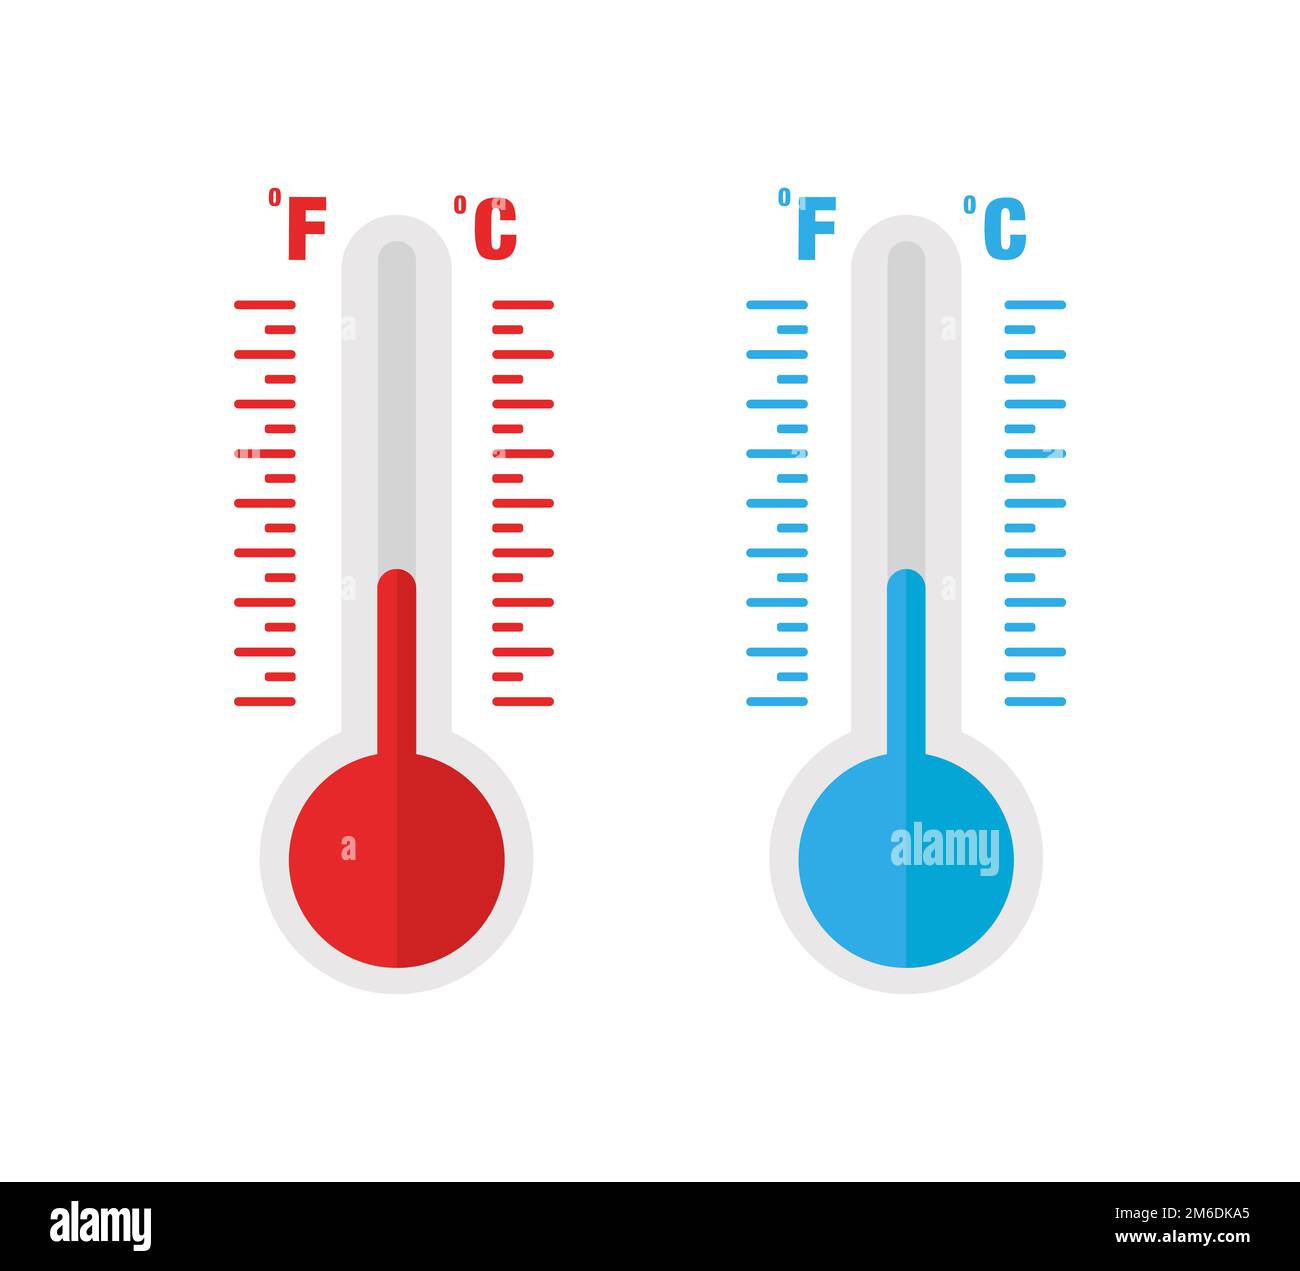 Thermometer - Air Temperature Measuring Device in Vector Stock Vector -  Illustration of blue, measuring: 96329764